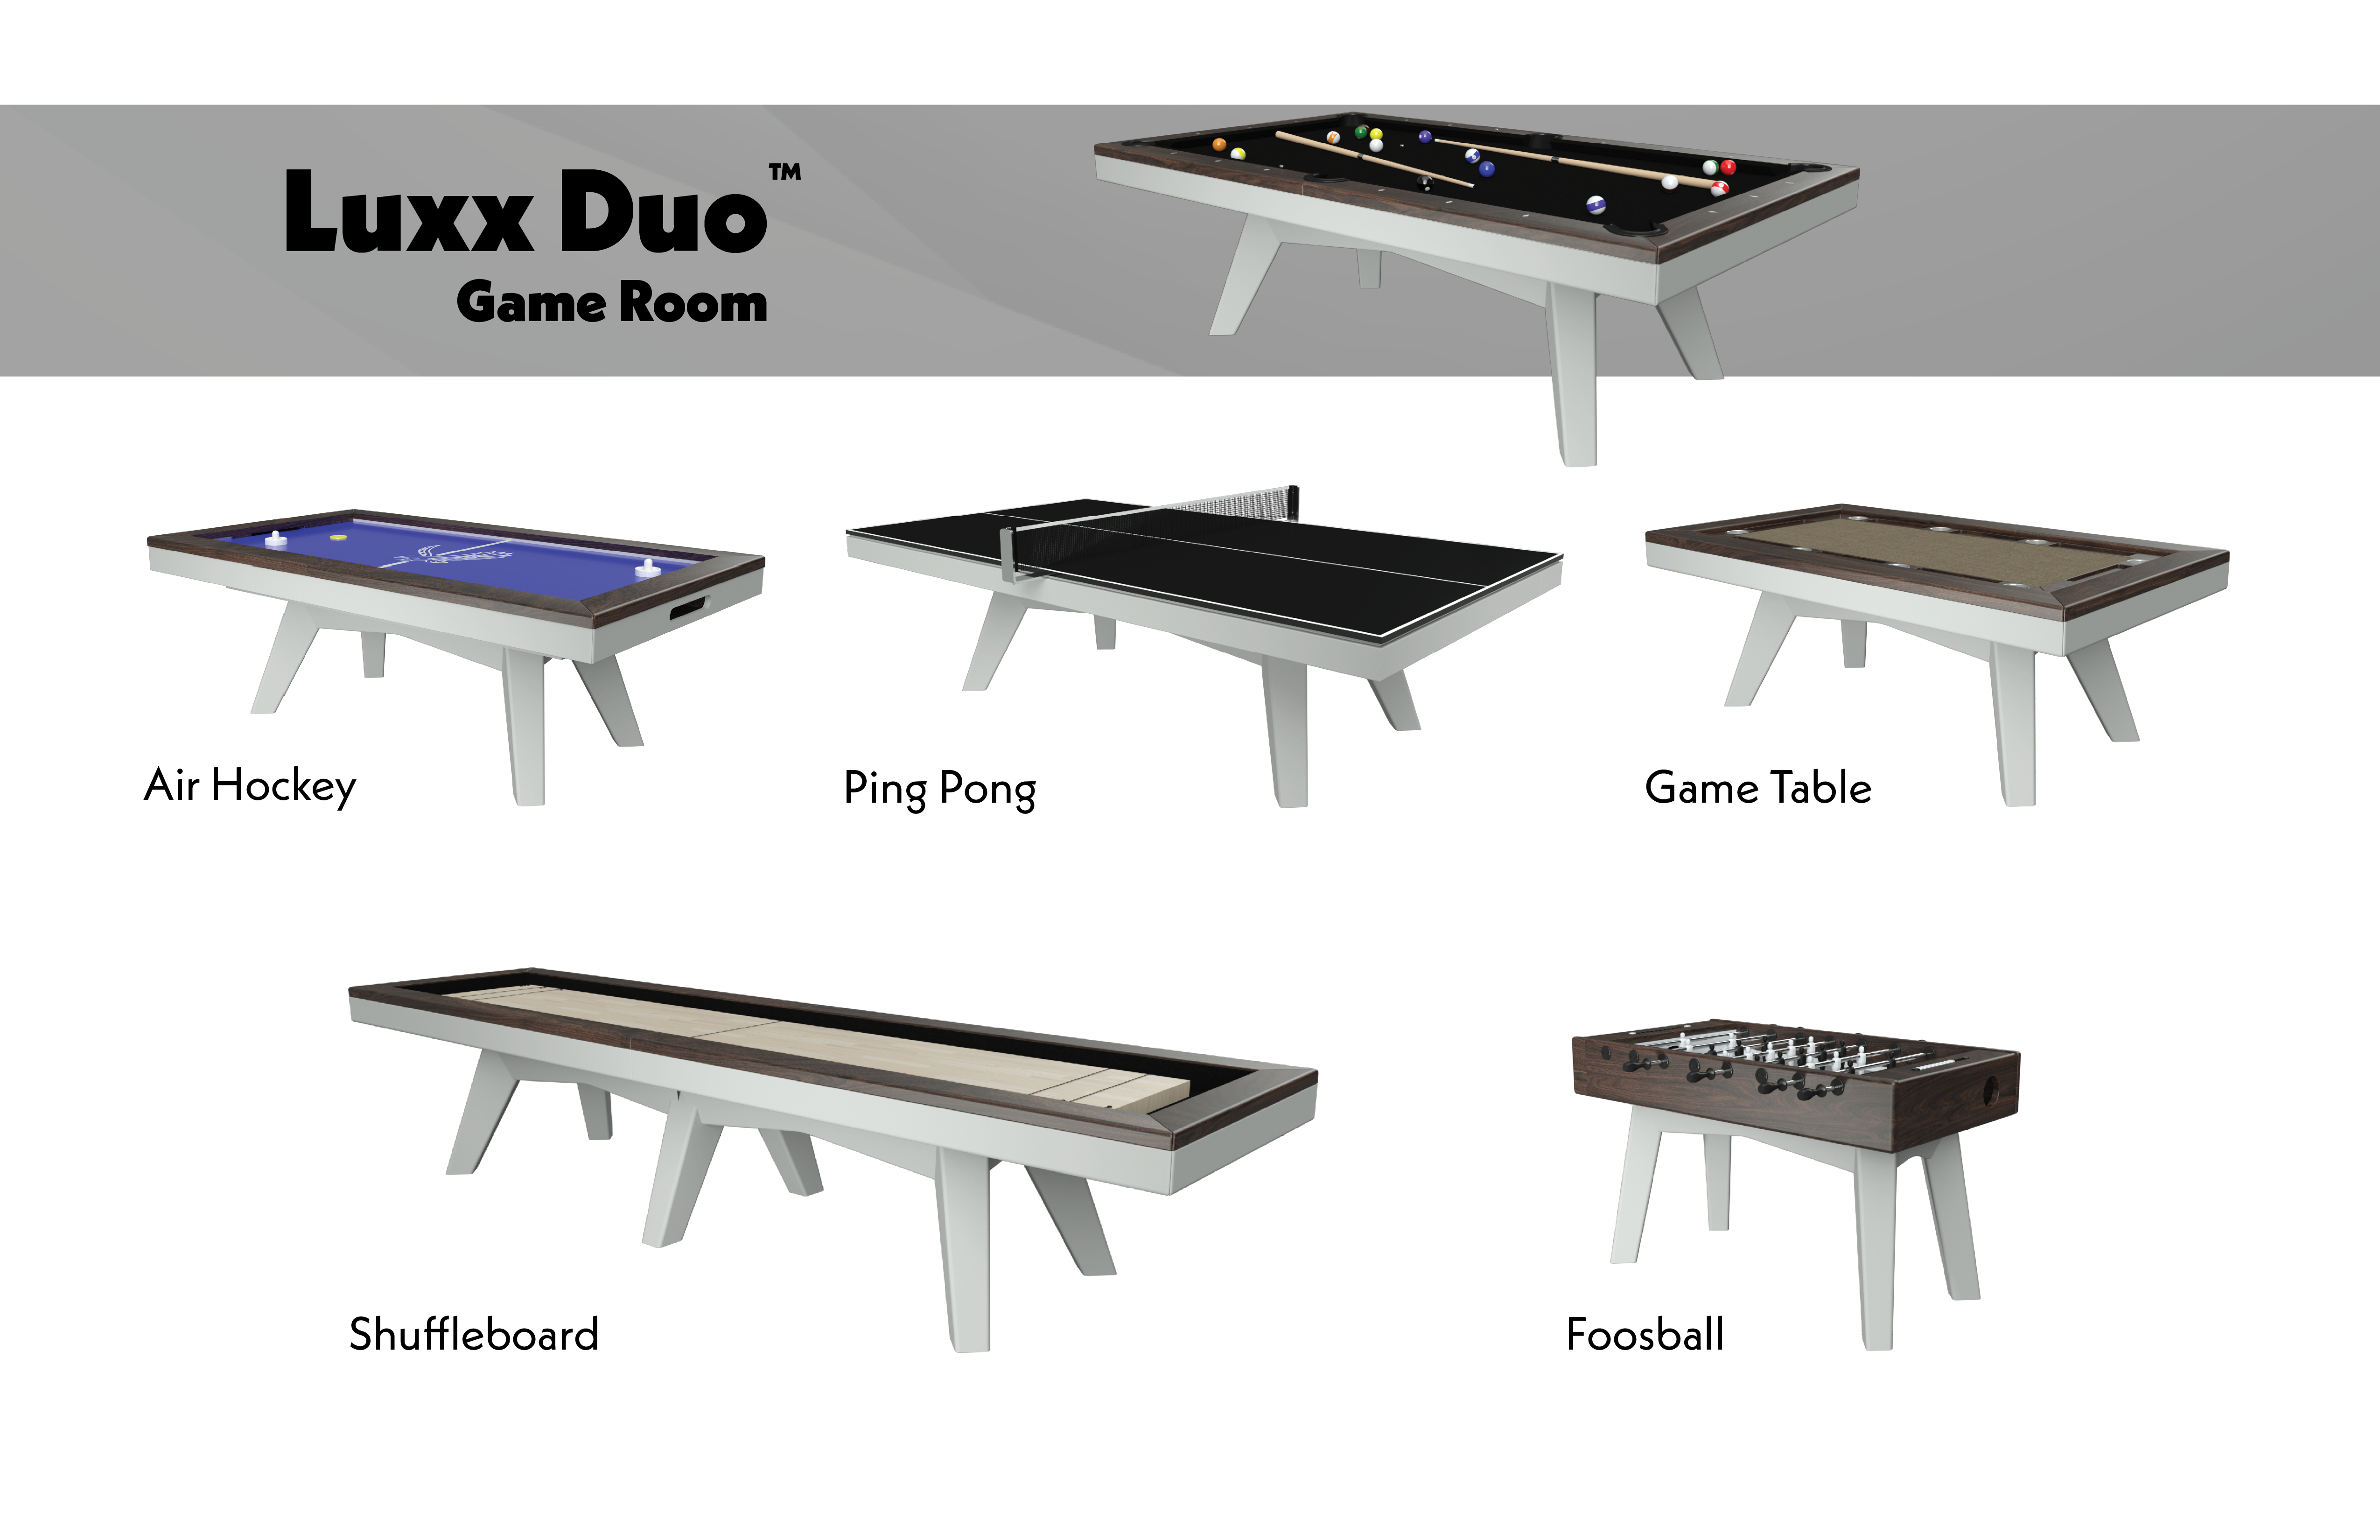 LUXX DUO GAME ROOM